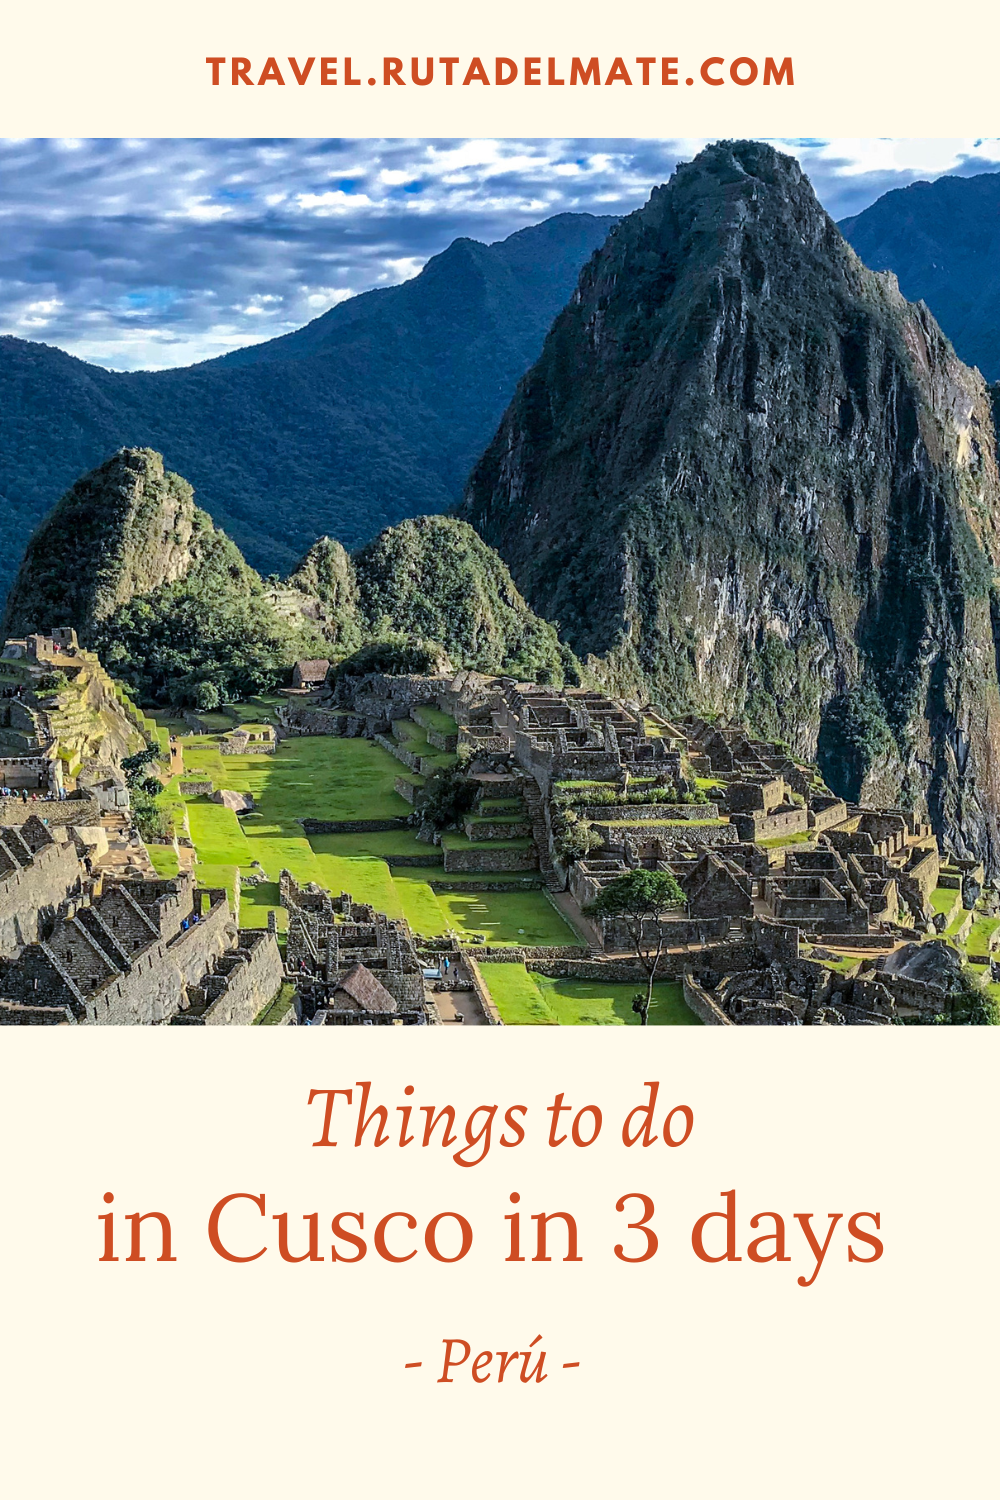 Things to do in Cusco in 3 days